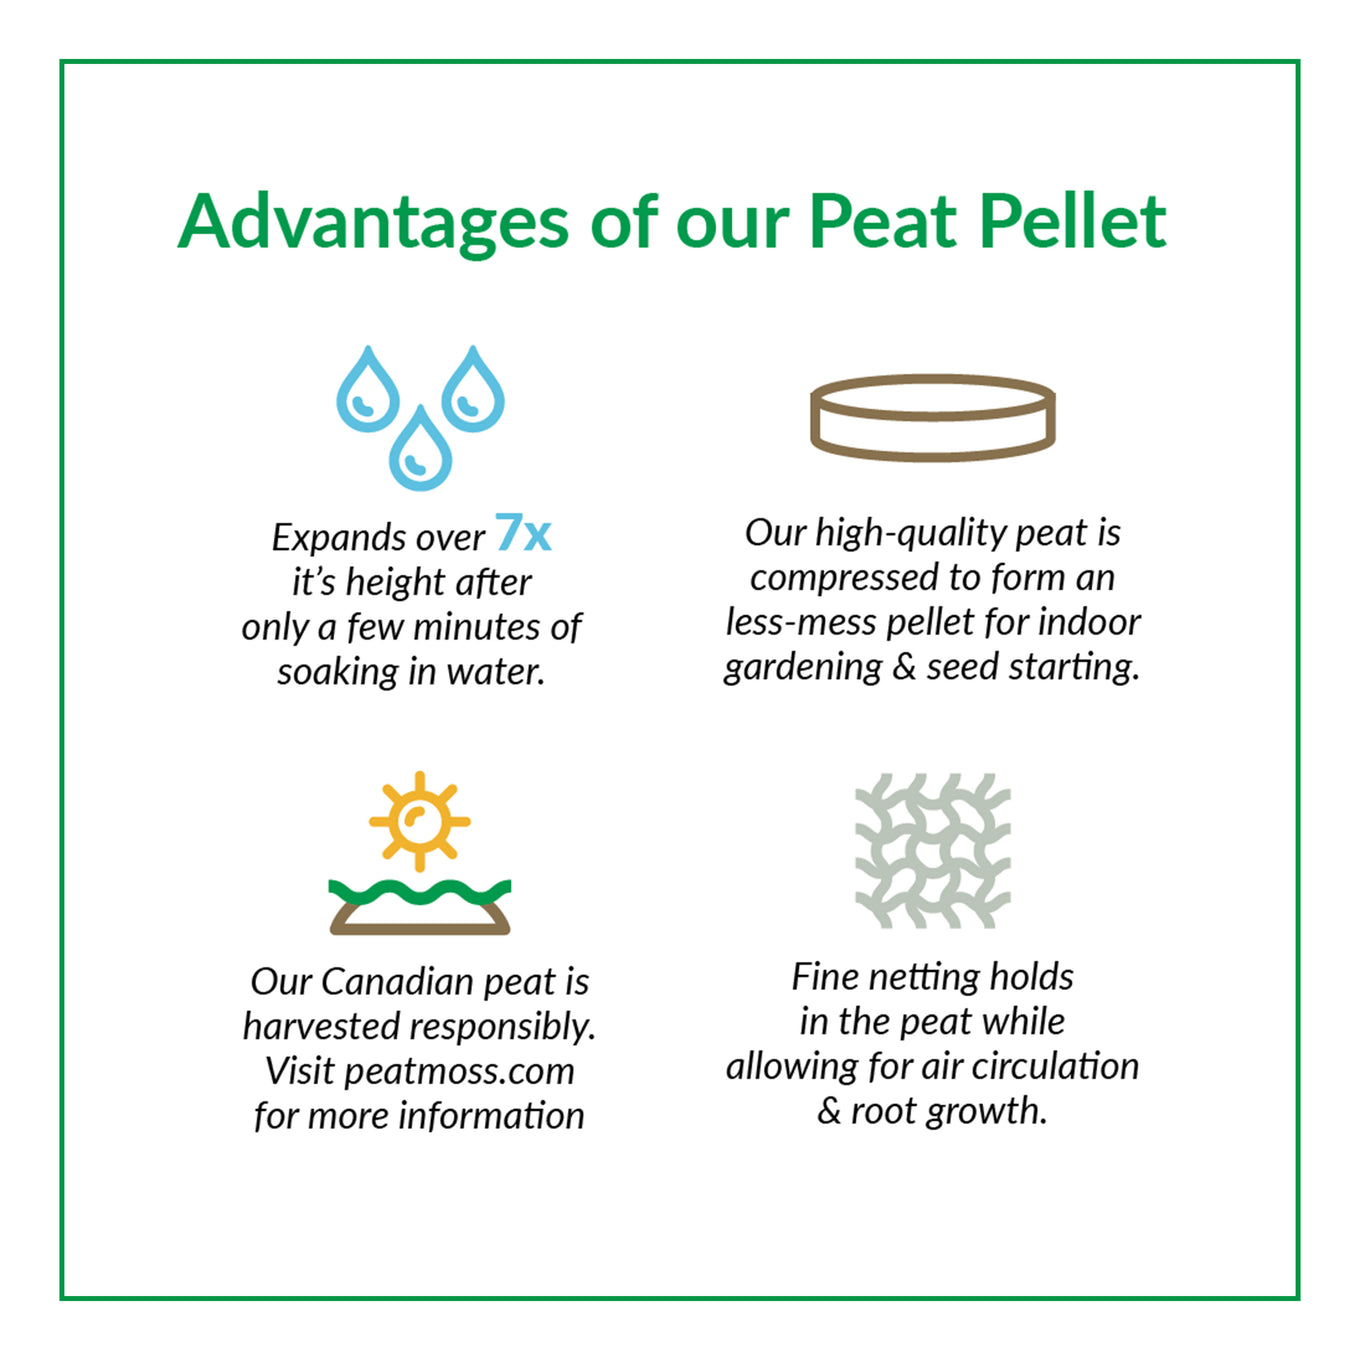 Illustration of the advantages of using a peat pellet for seed starting